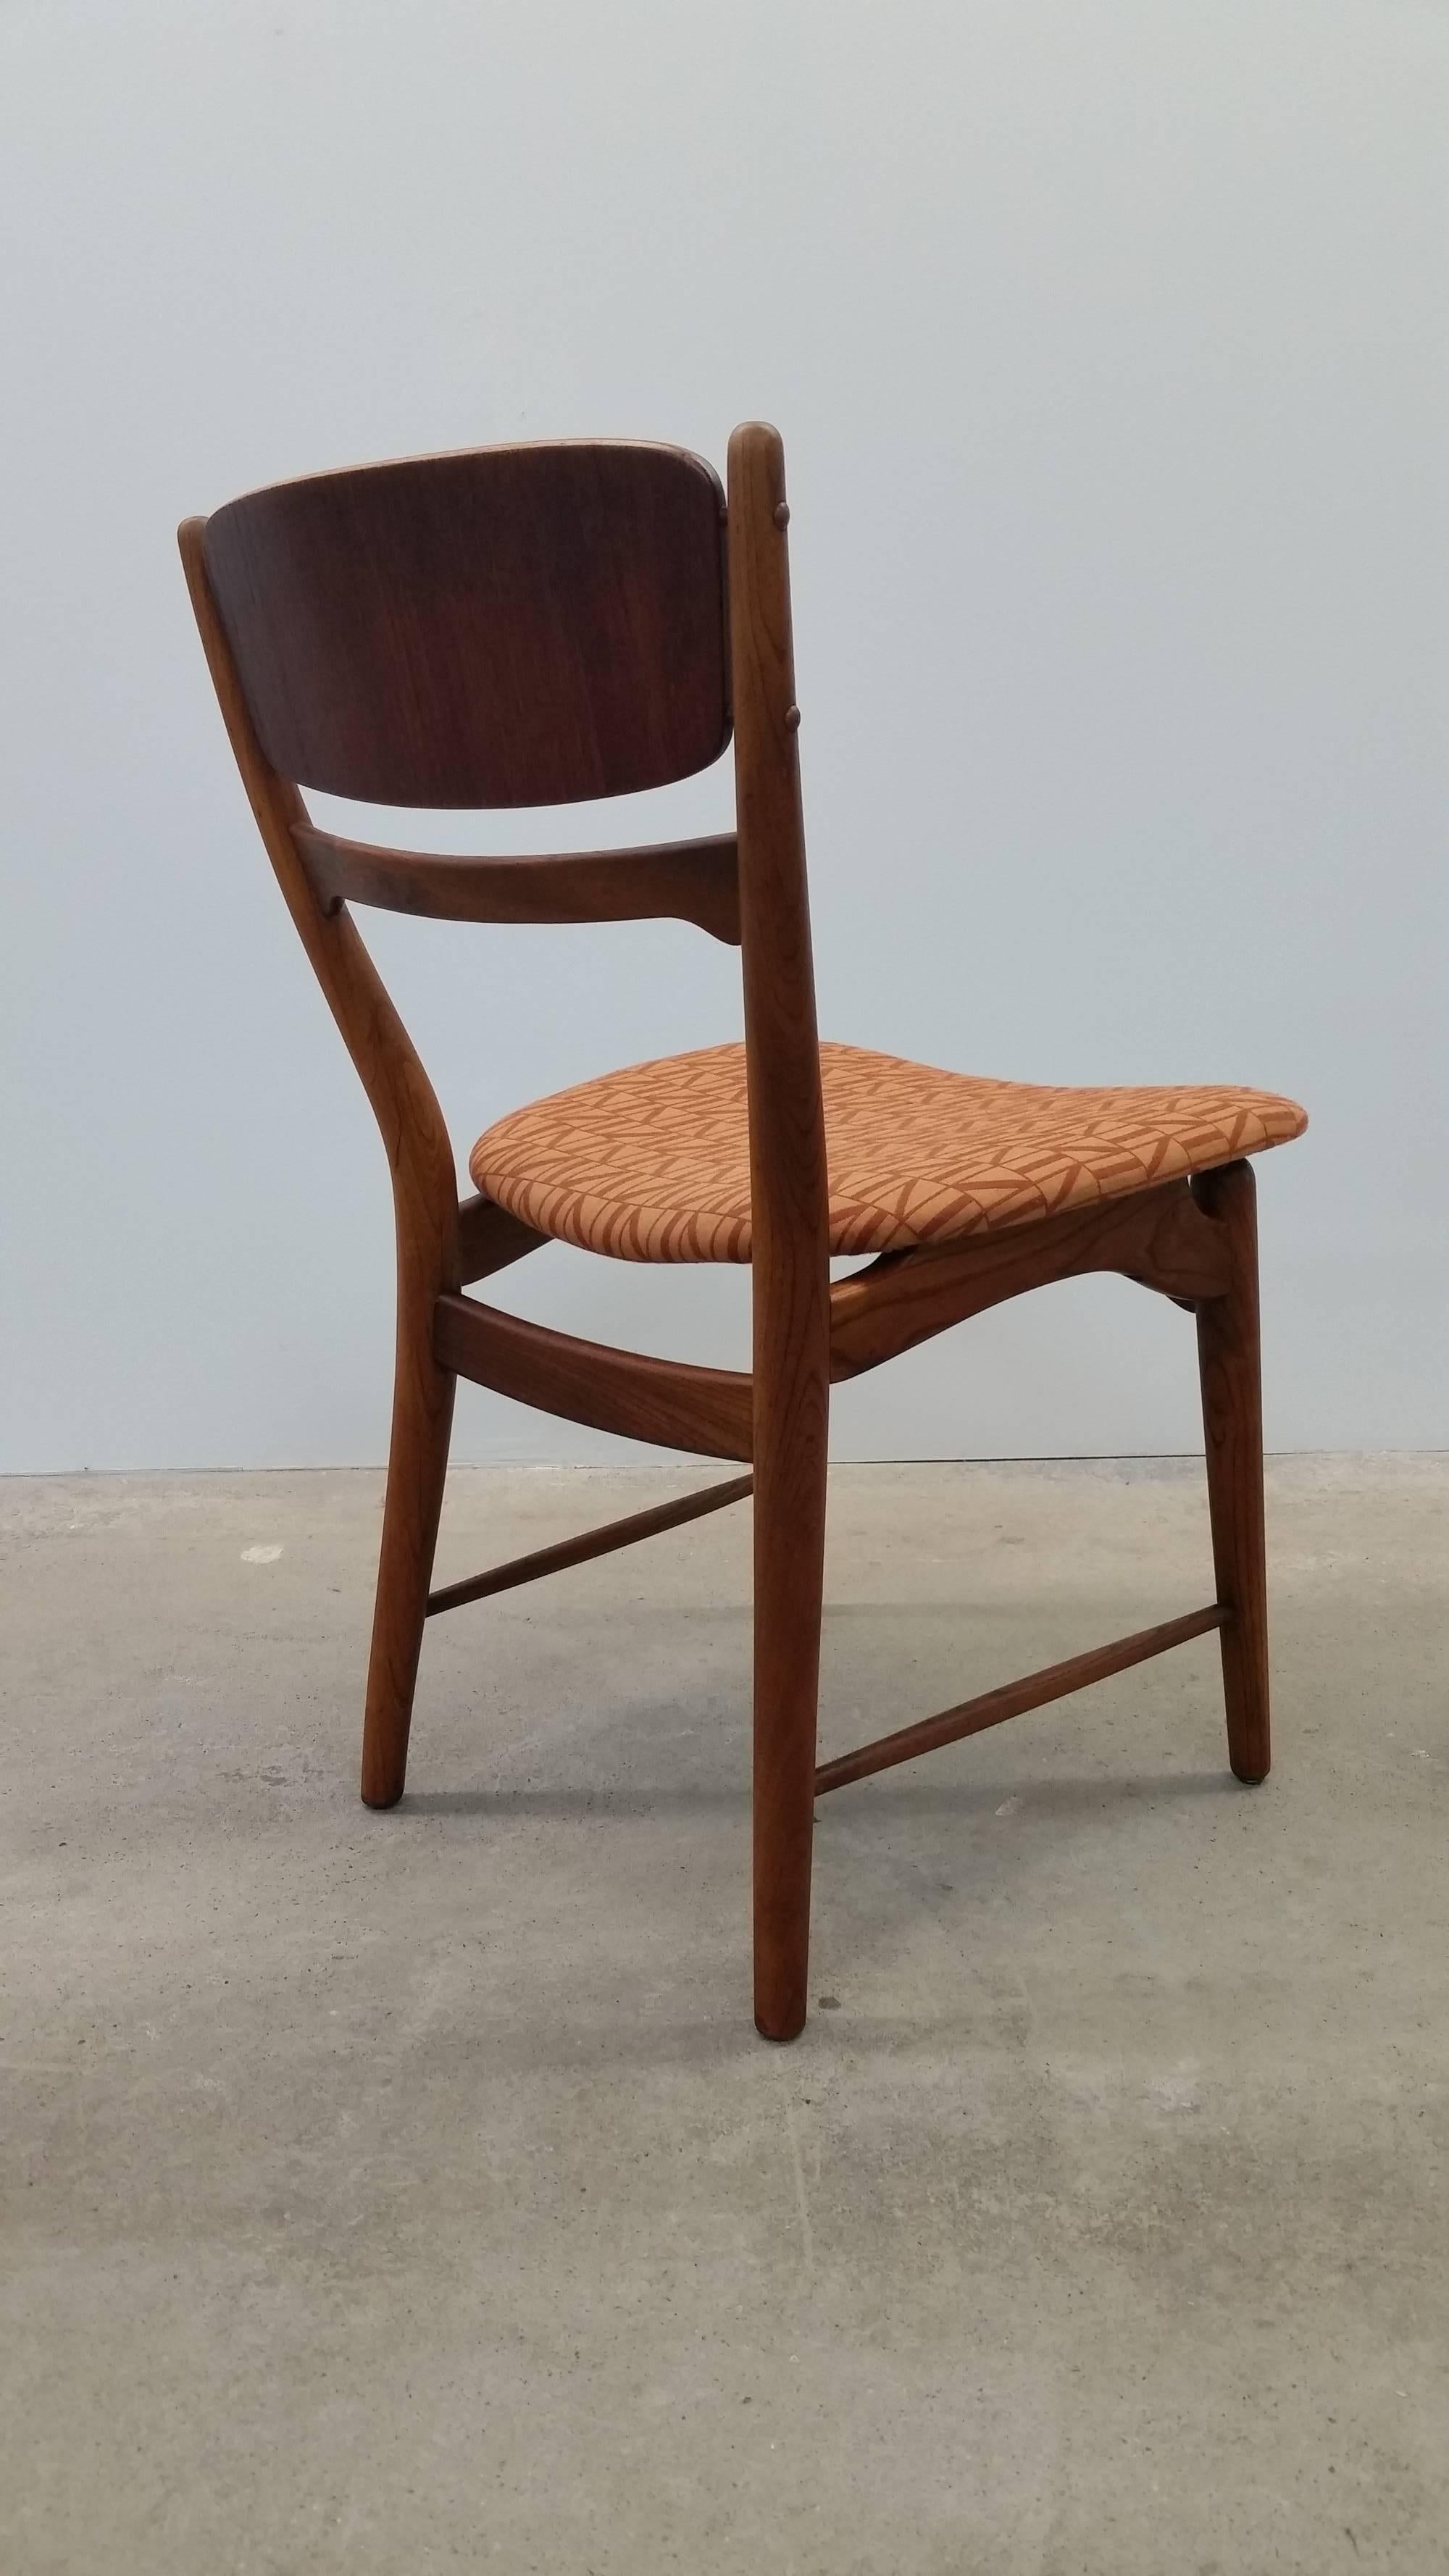 20th Century Set of Four Dining Chairs in Walnut and Teak, by Arne Wahl Iversen For Sale